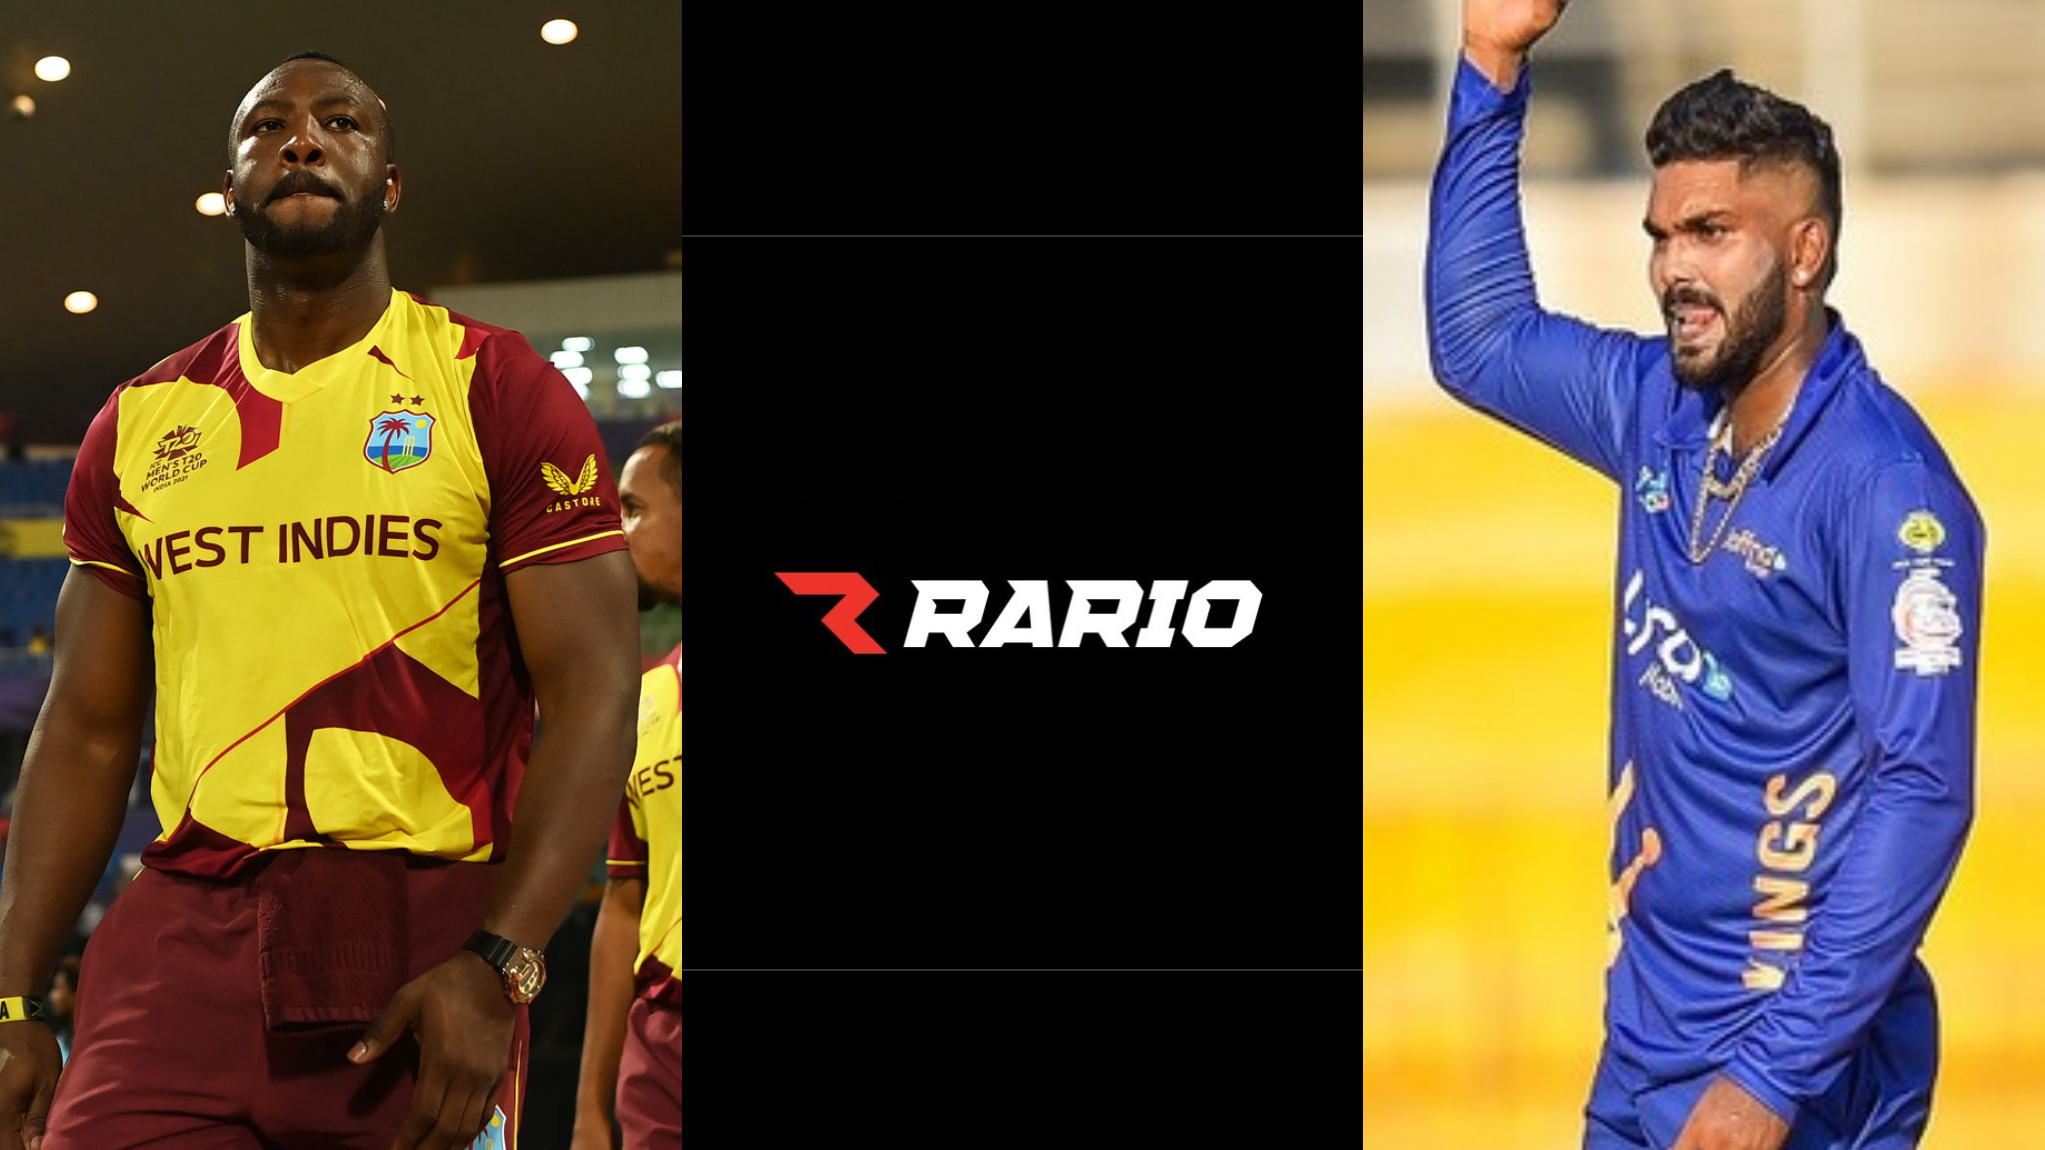 Rario D3 Predictions: Grab exciting player cards for UAE INTL T20 league and play for great prizes.